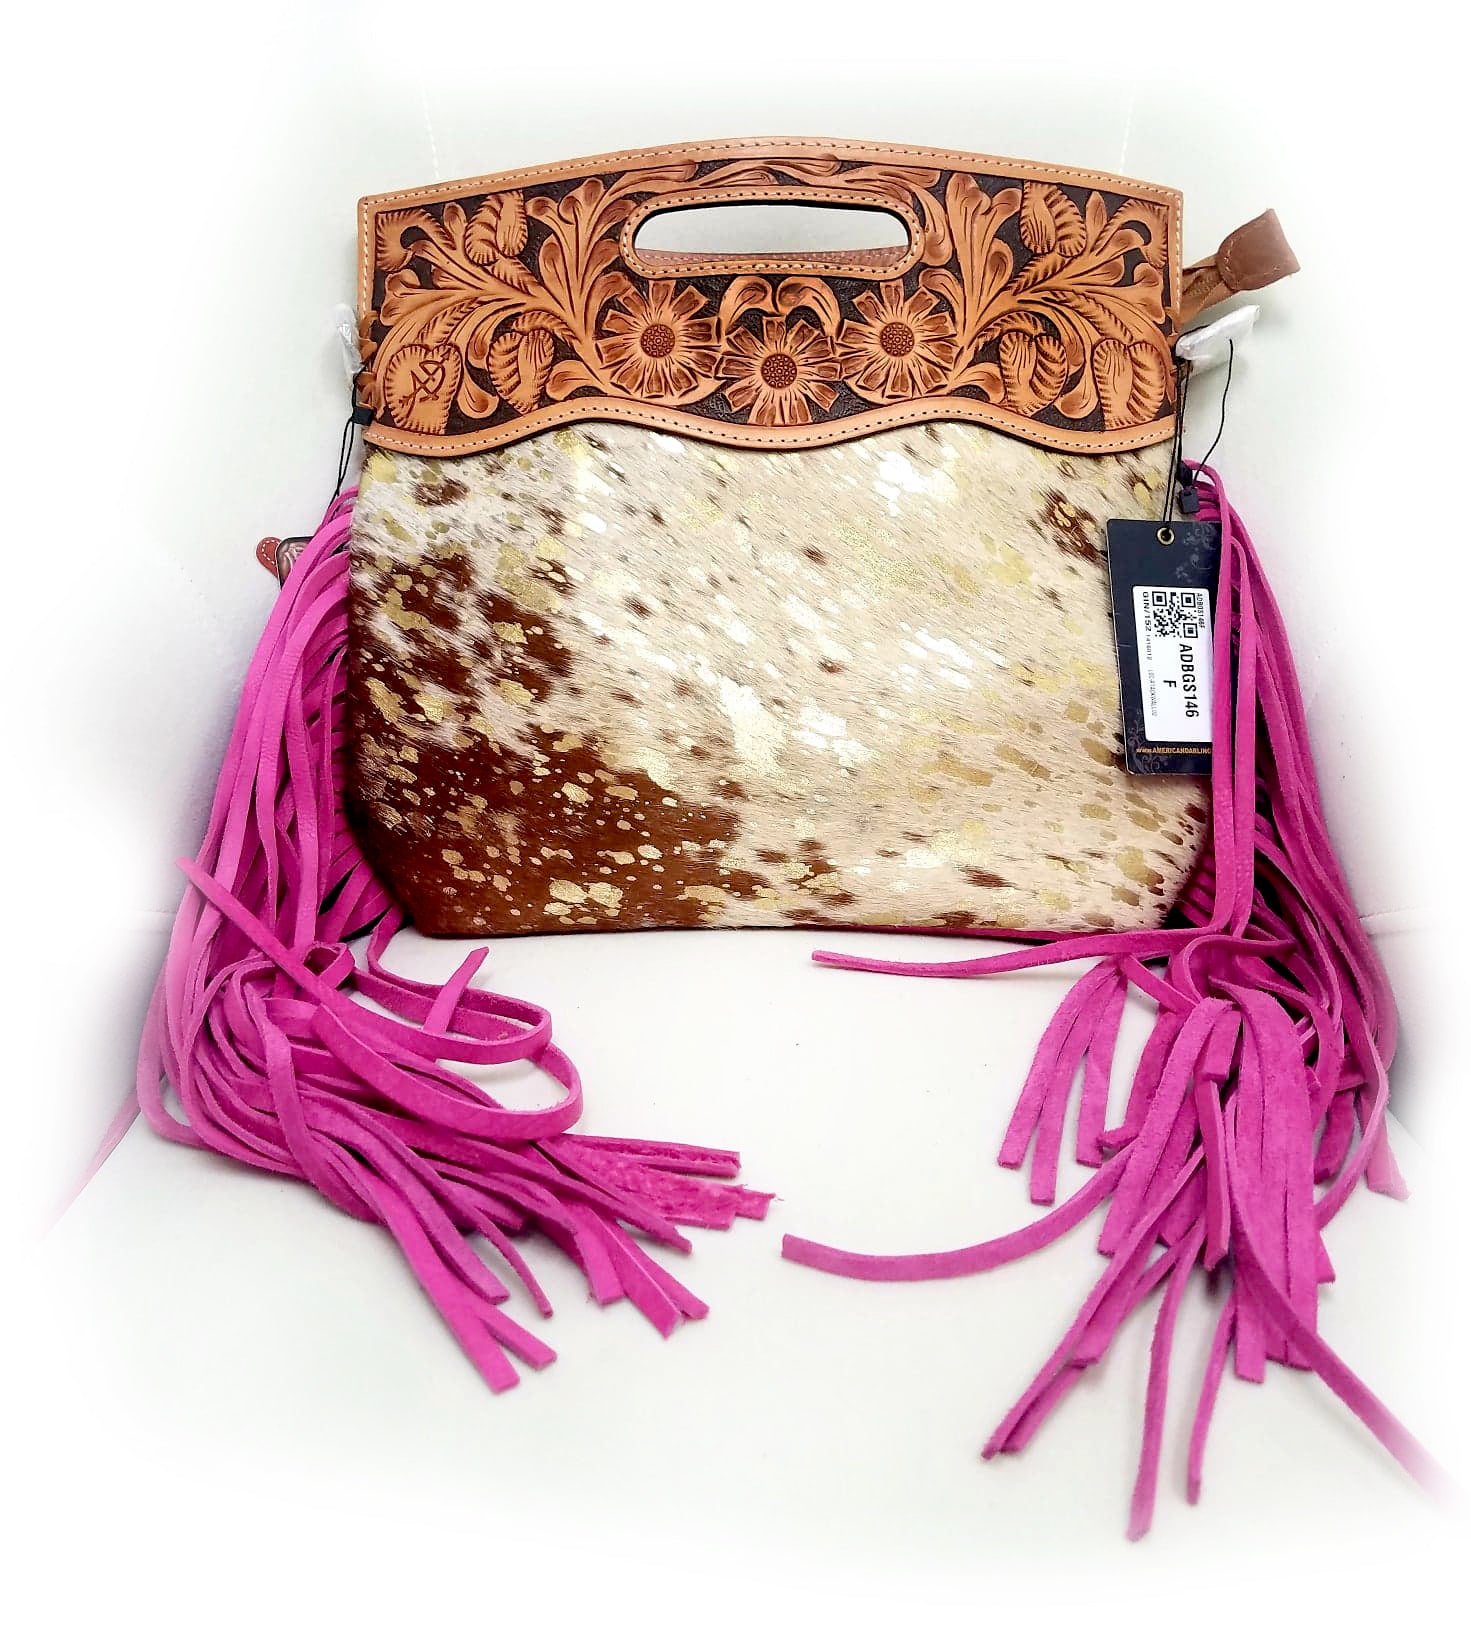 American Darling Brown White Hide and Fringe Purse